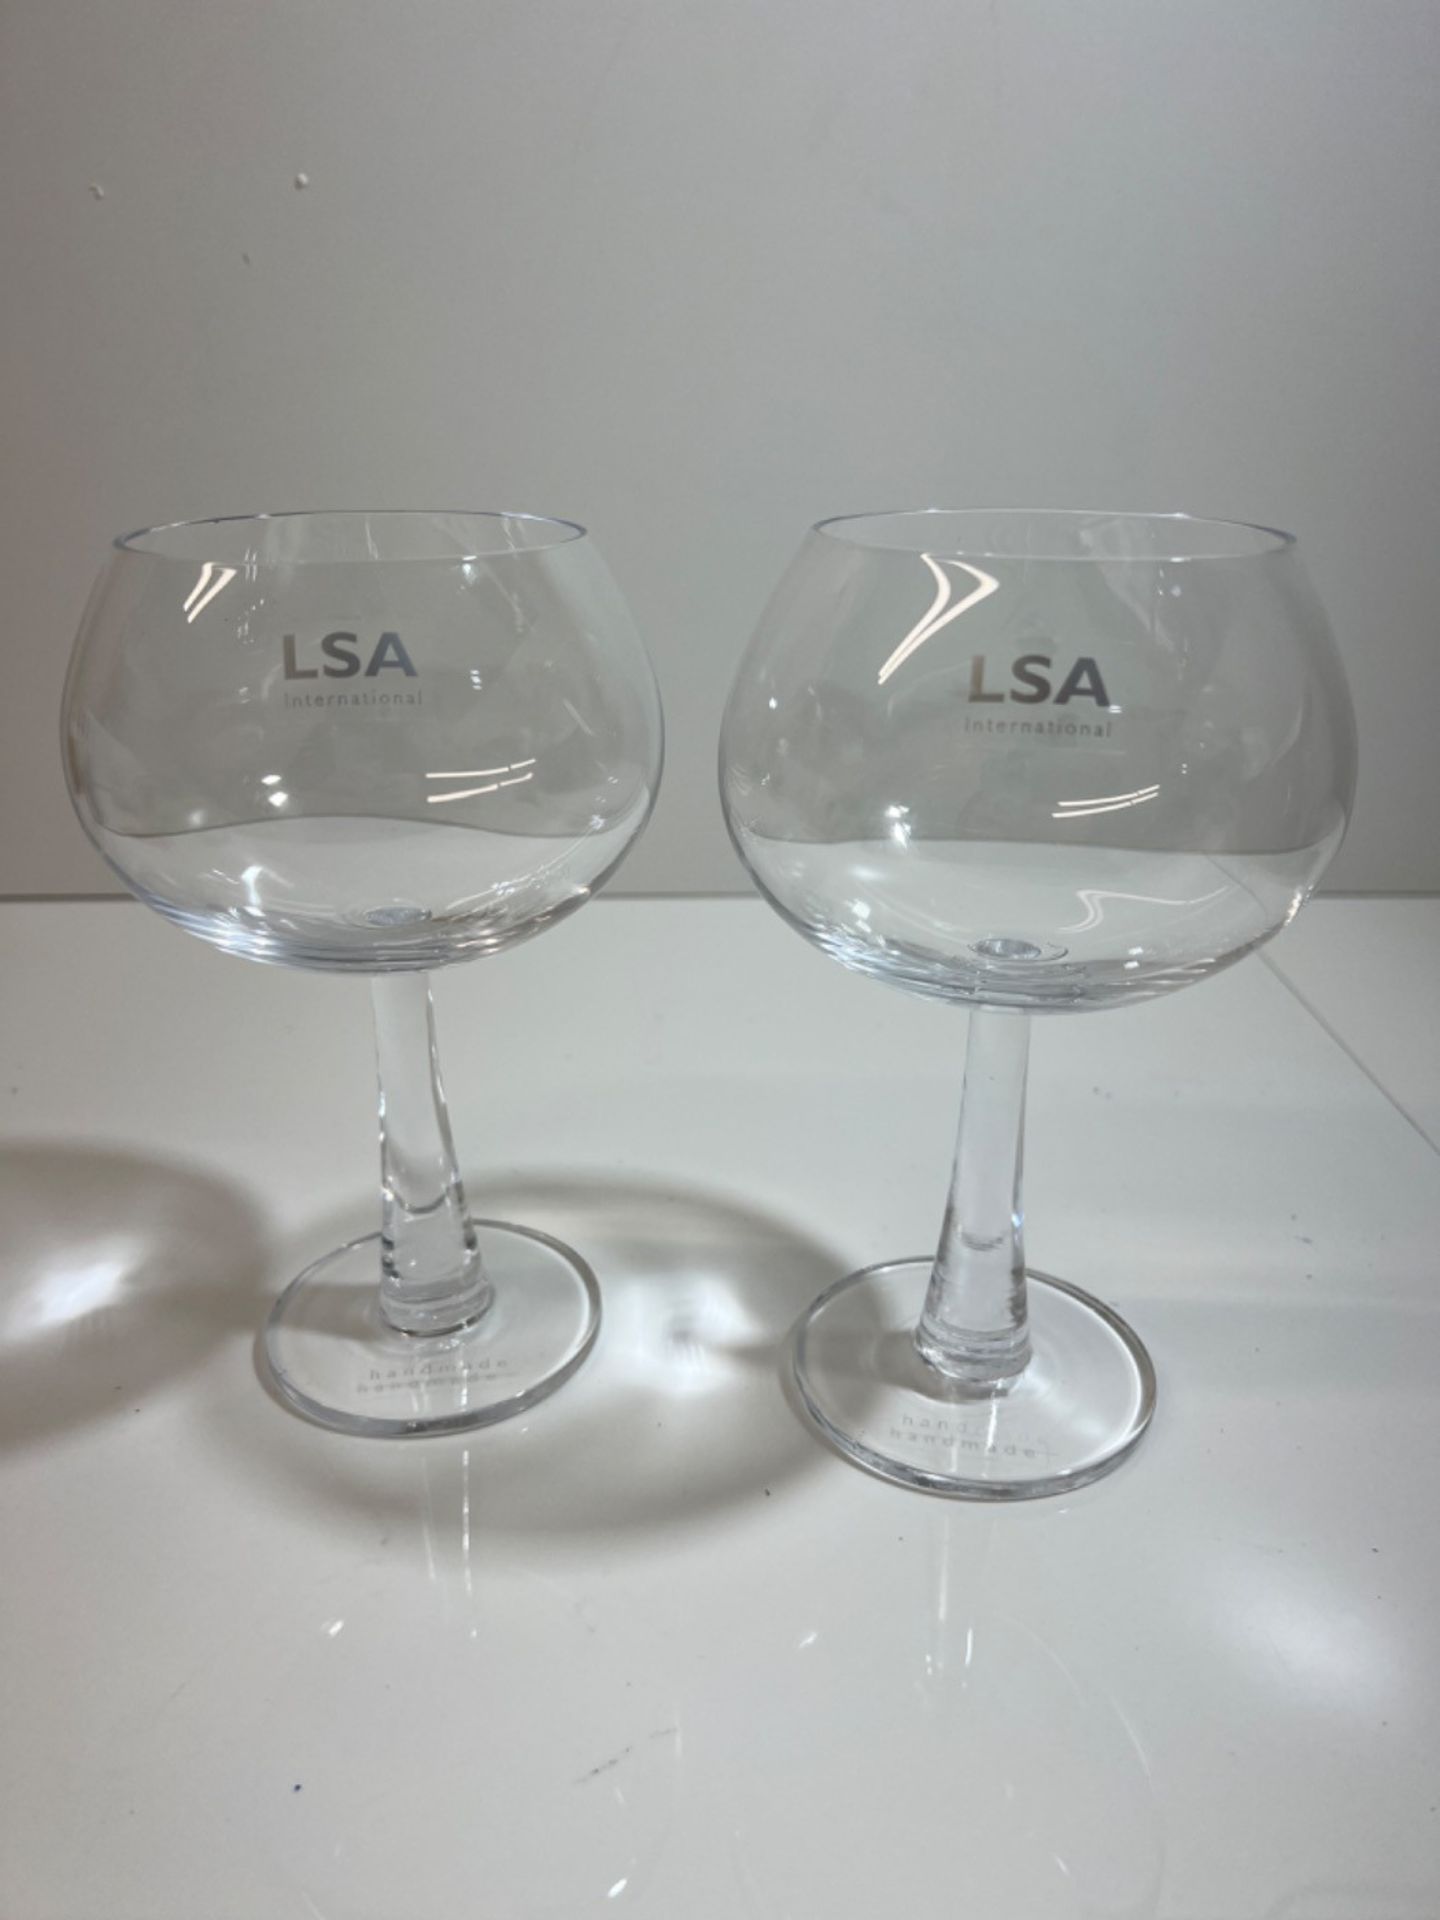 LSA International Gin Balloon Glass 420 ml Clear | Set of 2 | Mouthblown and Handmade Glass | GN03 - Image 3 of 3